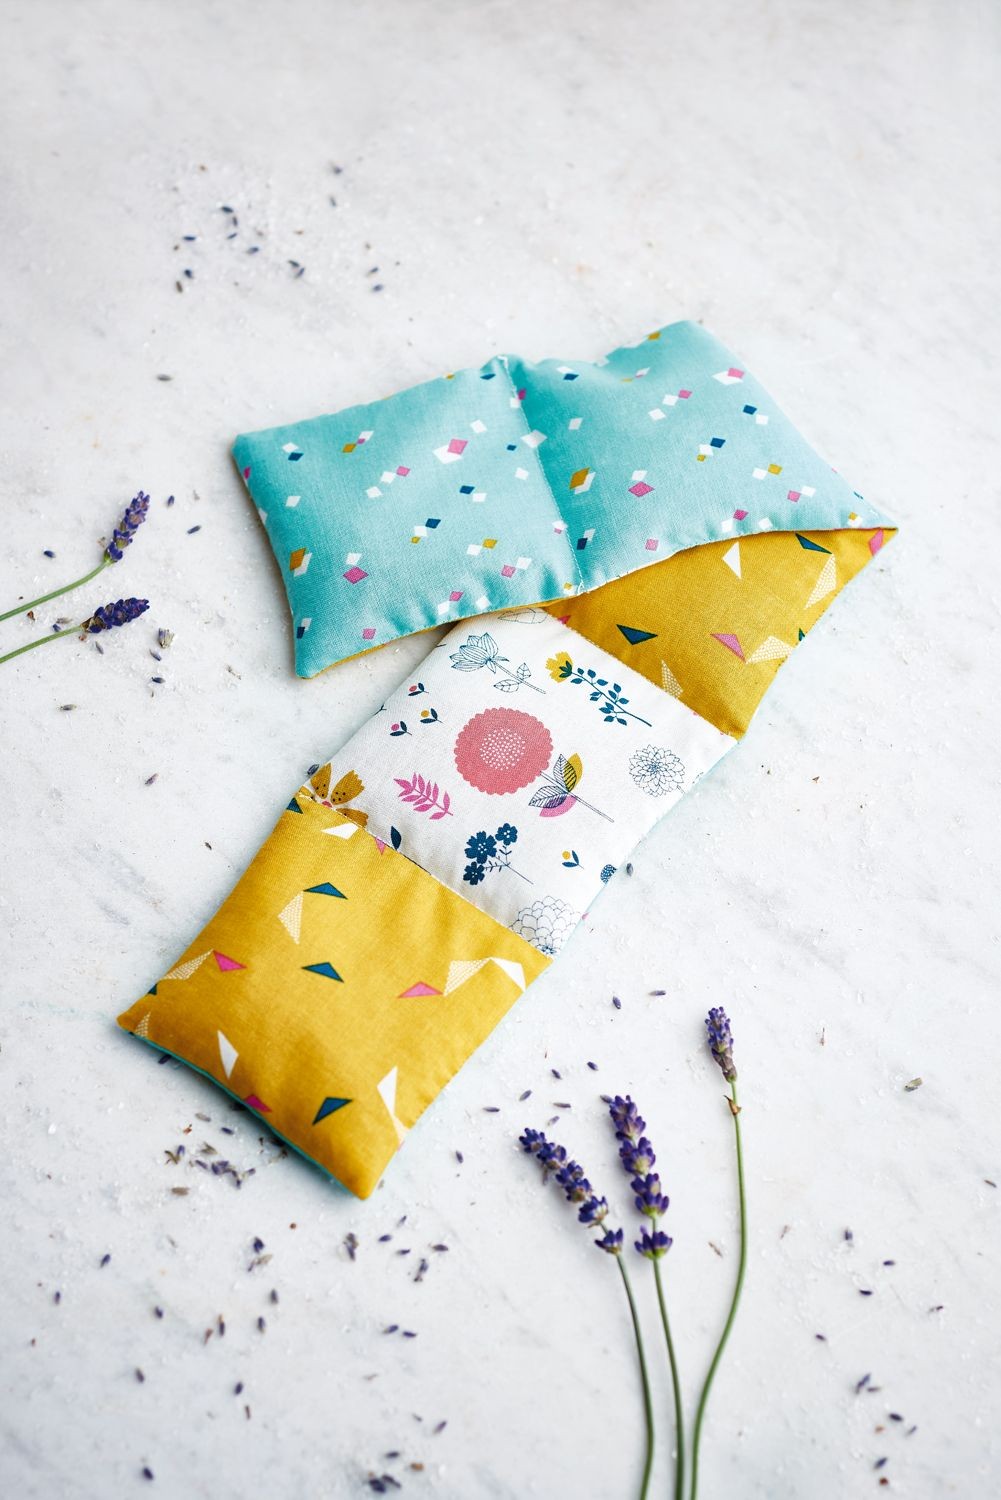 Stitch Papercraft Stitch A Lavender Heat Wrap with issue 48 Of Homemaker Image